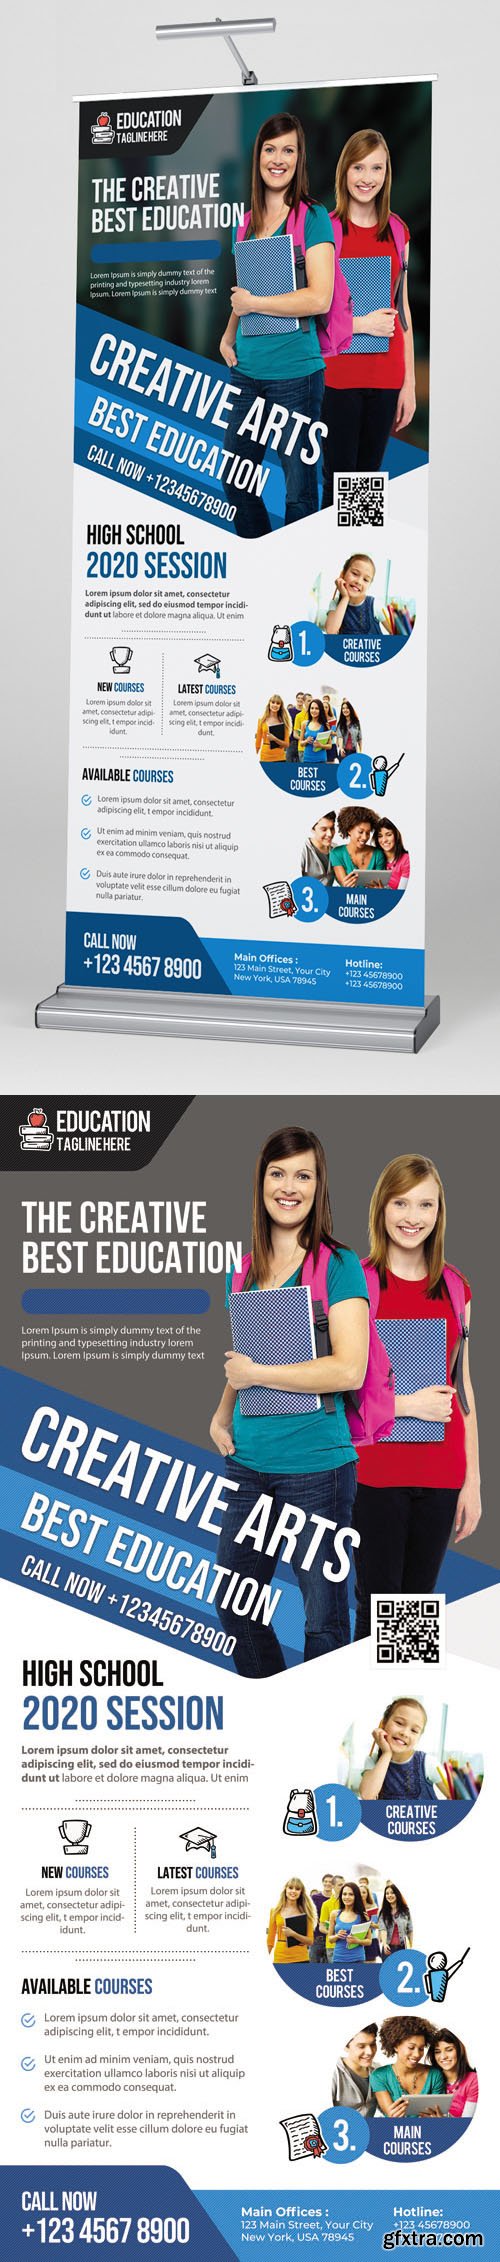 Education Roll-up Banner PSD Template